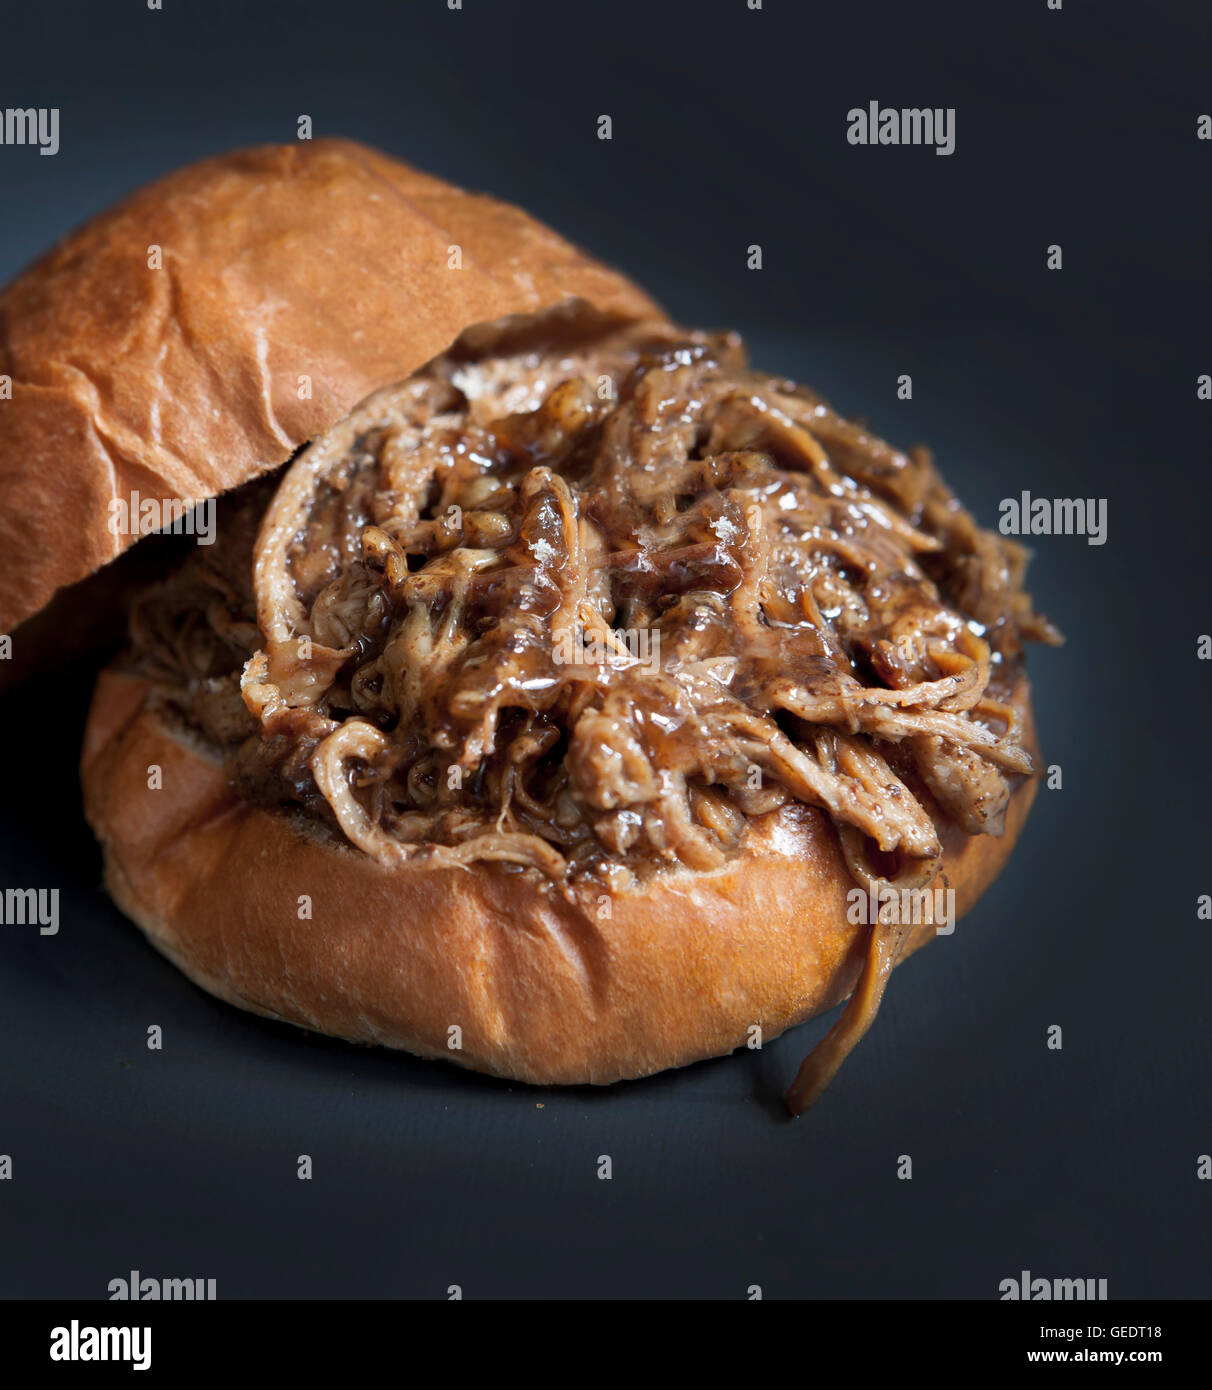 Homemade Barbeque Pulled Pork Sandwich on Bun Stock Photo